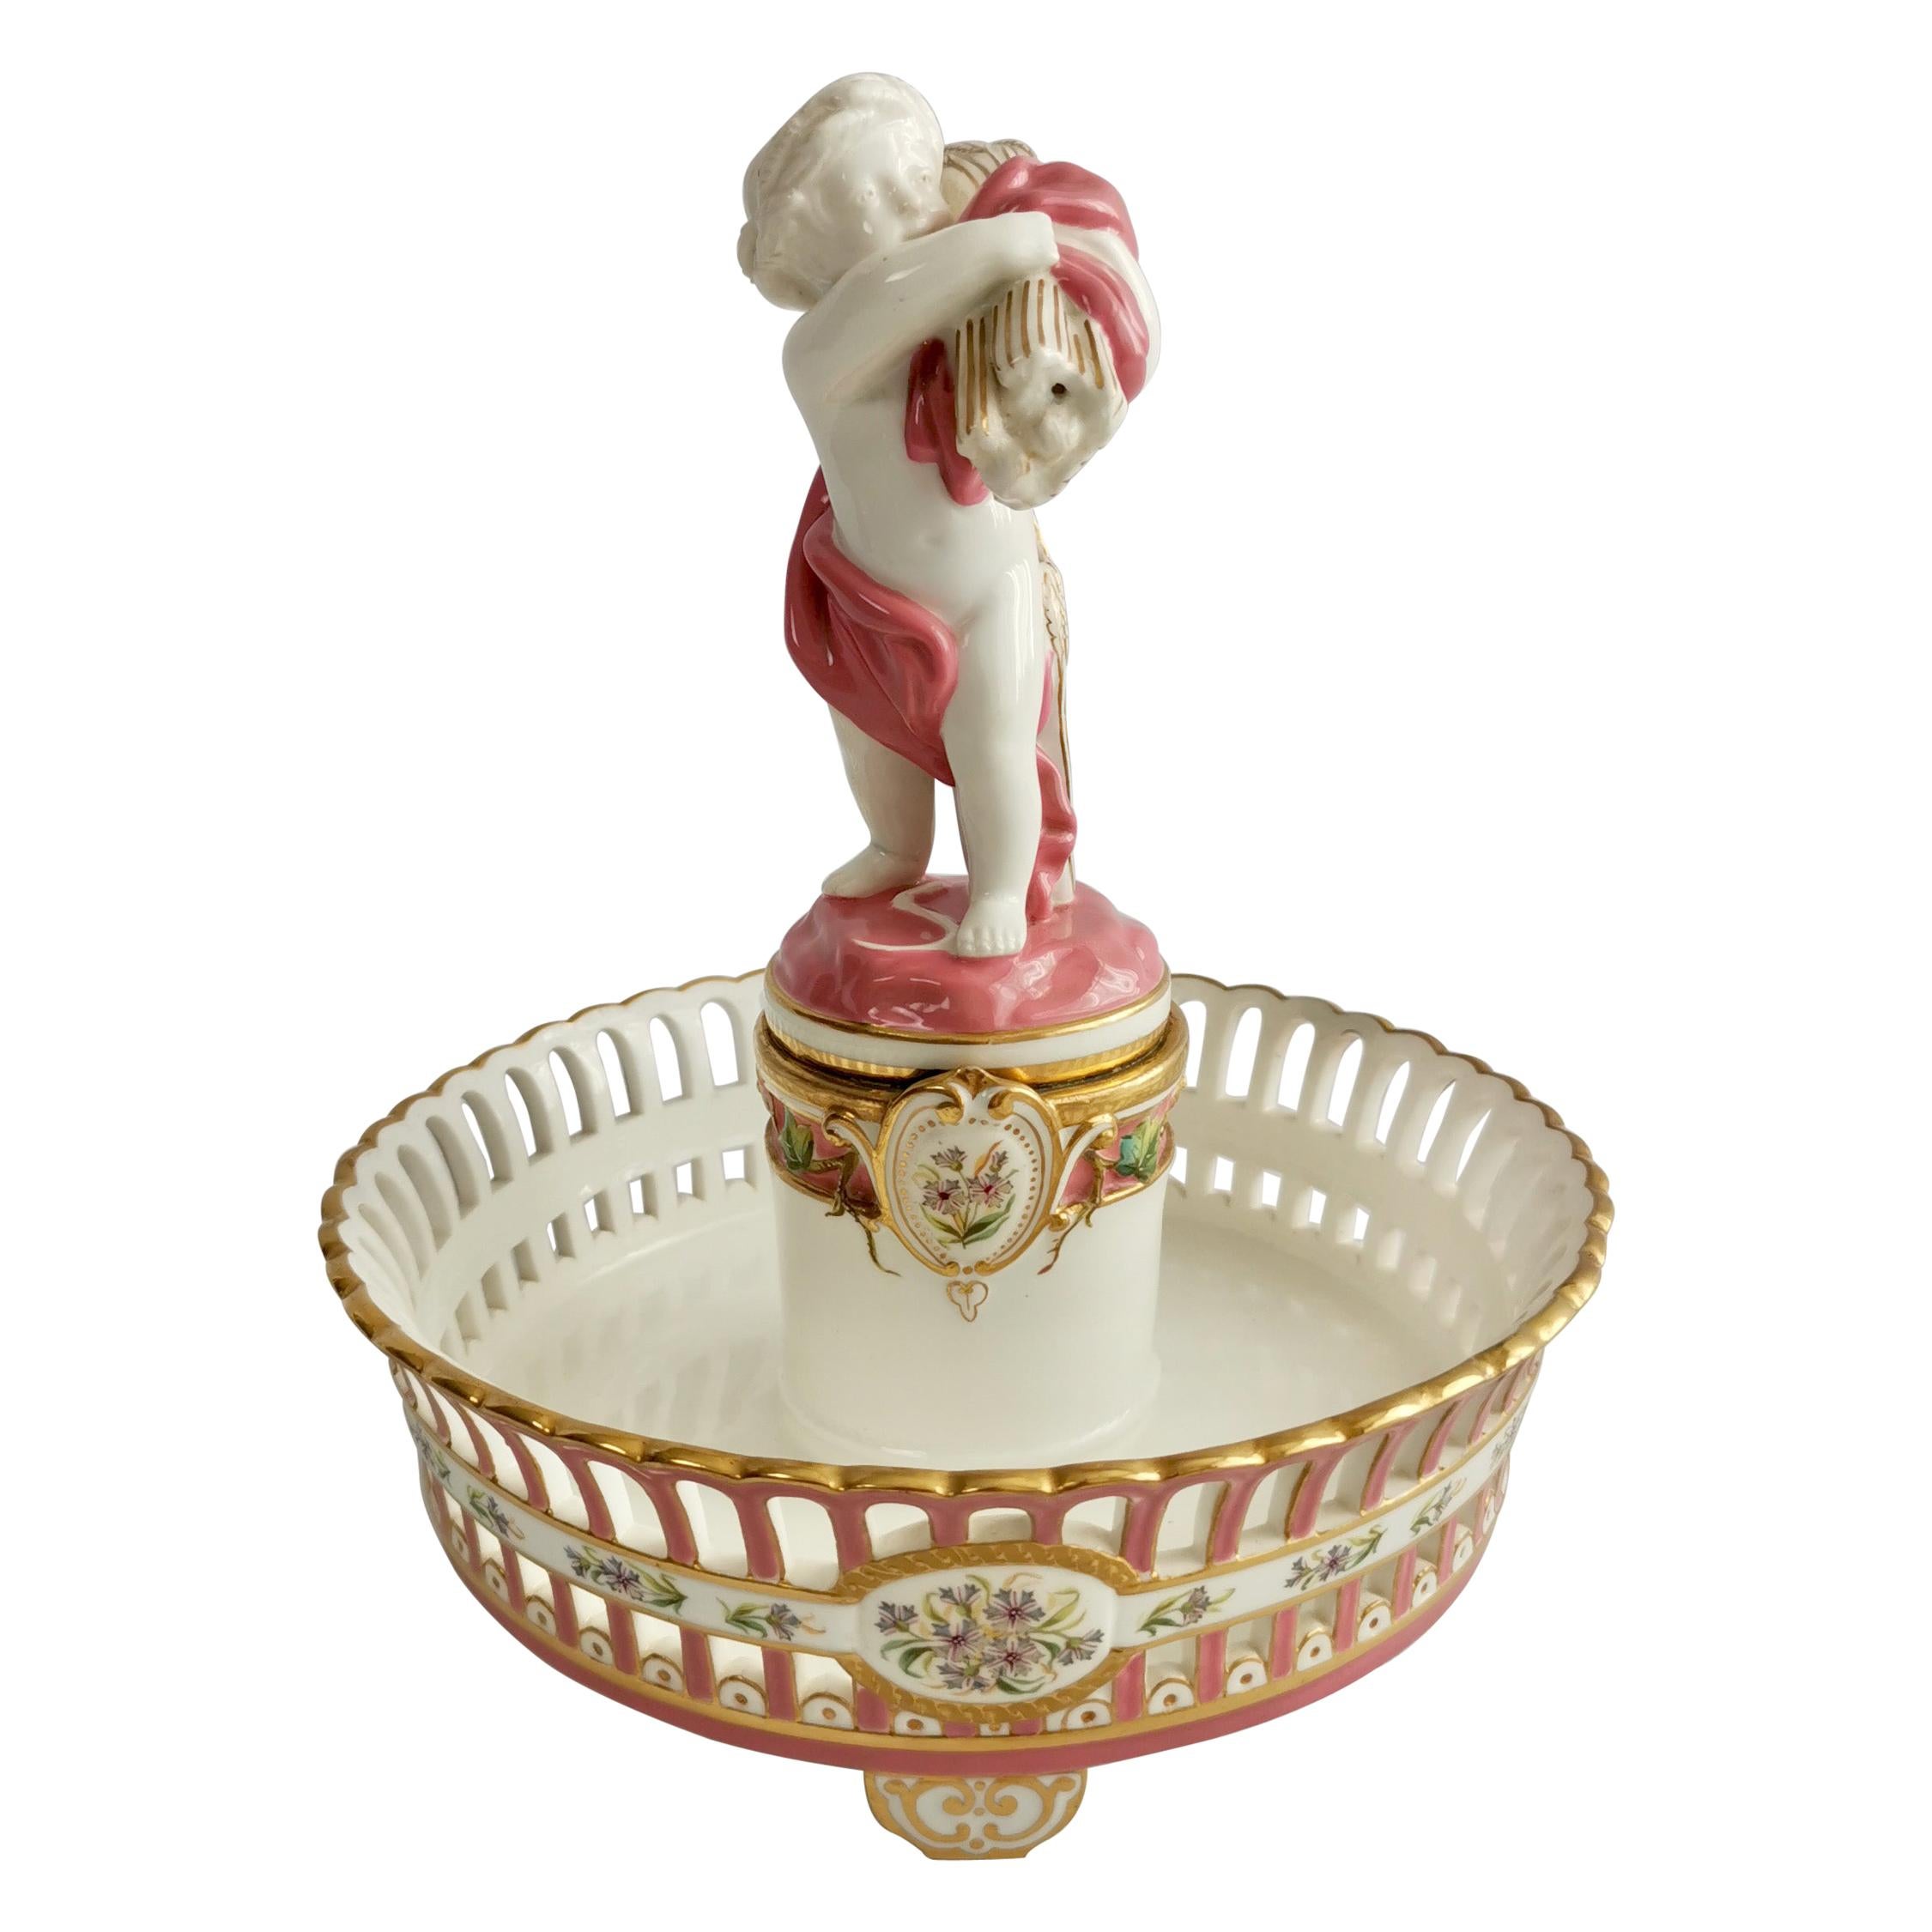 Minton Porcelain Tazza Dish, White and Pink with Cherub, 1891